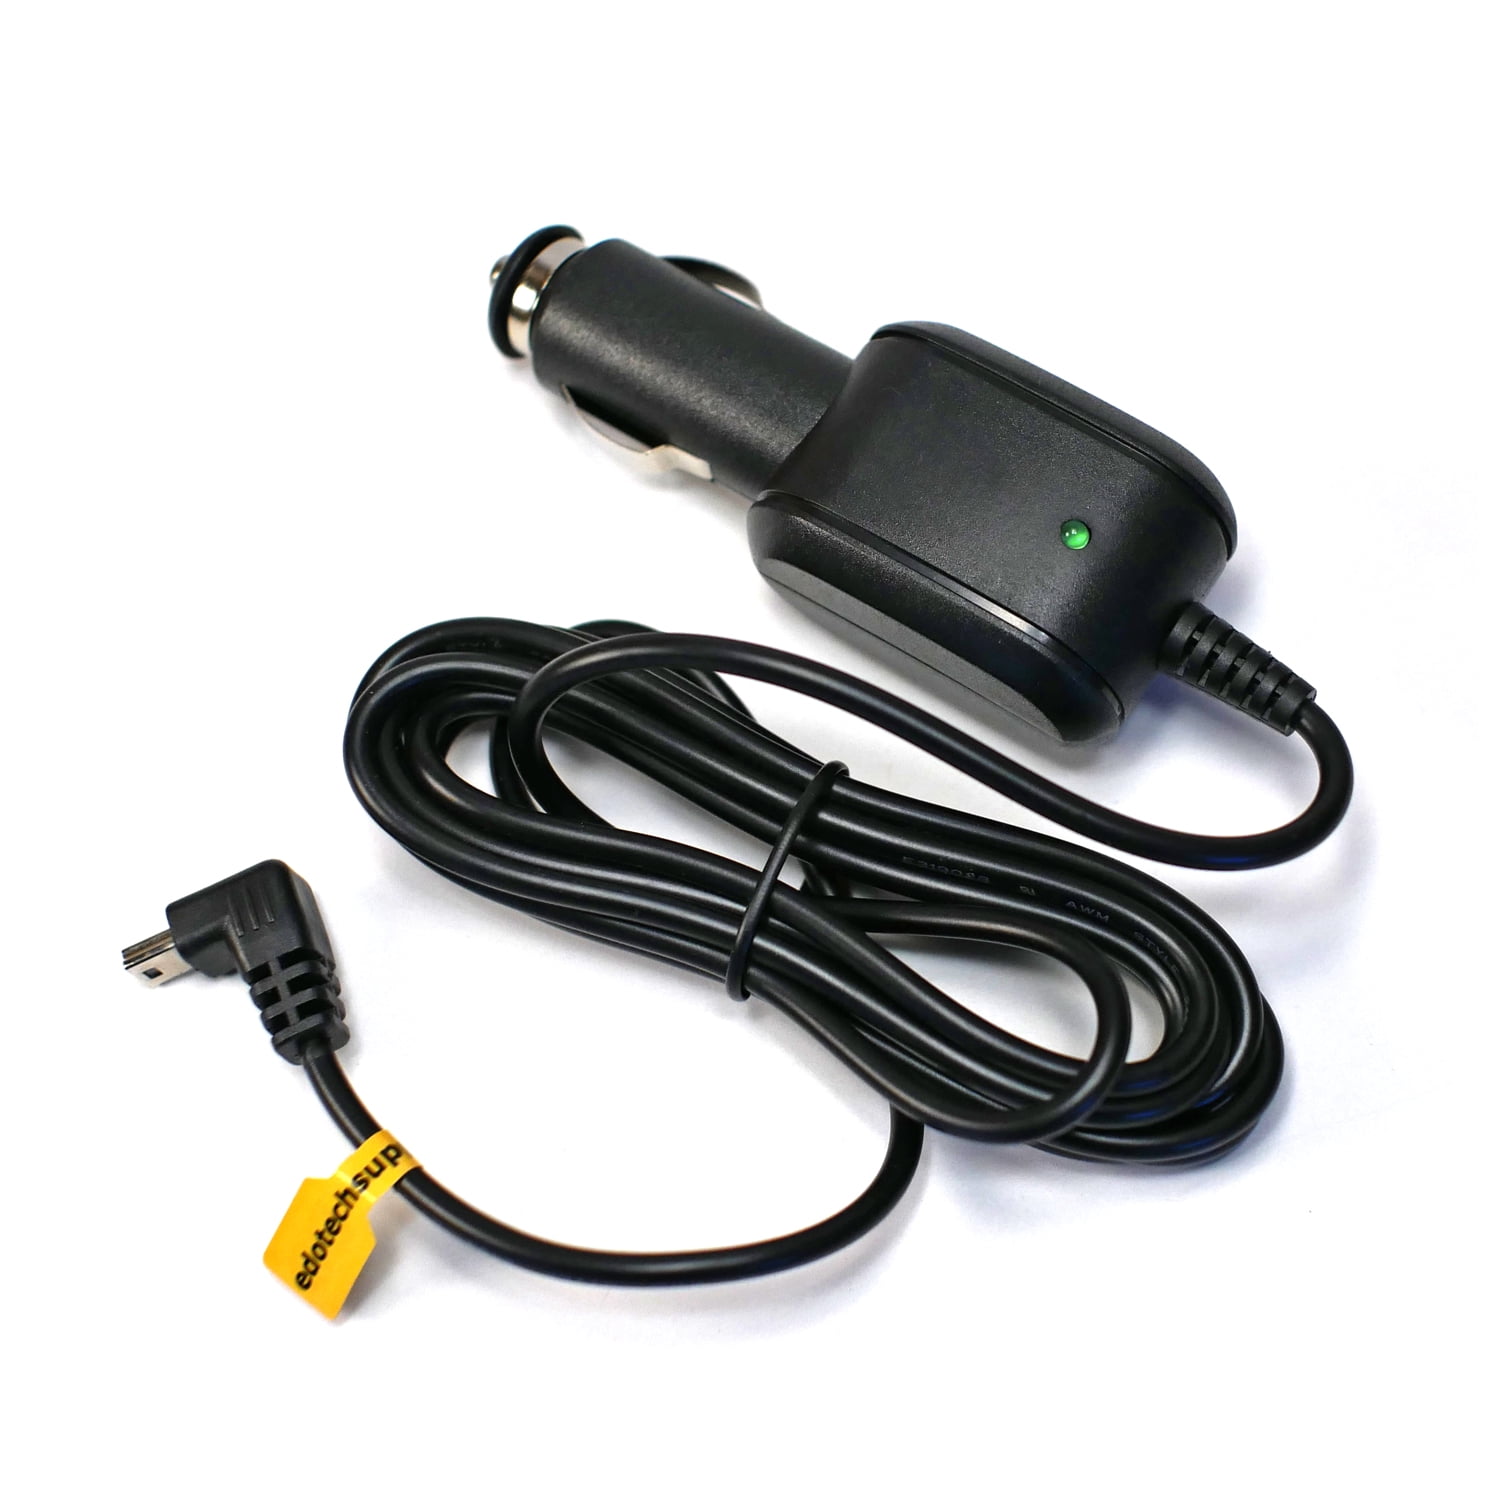 USB Car Charger Adapter Power Cord for GARMIN nuvi 50 50LM Navigation GPS 